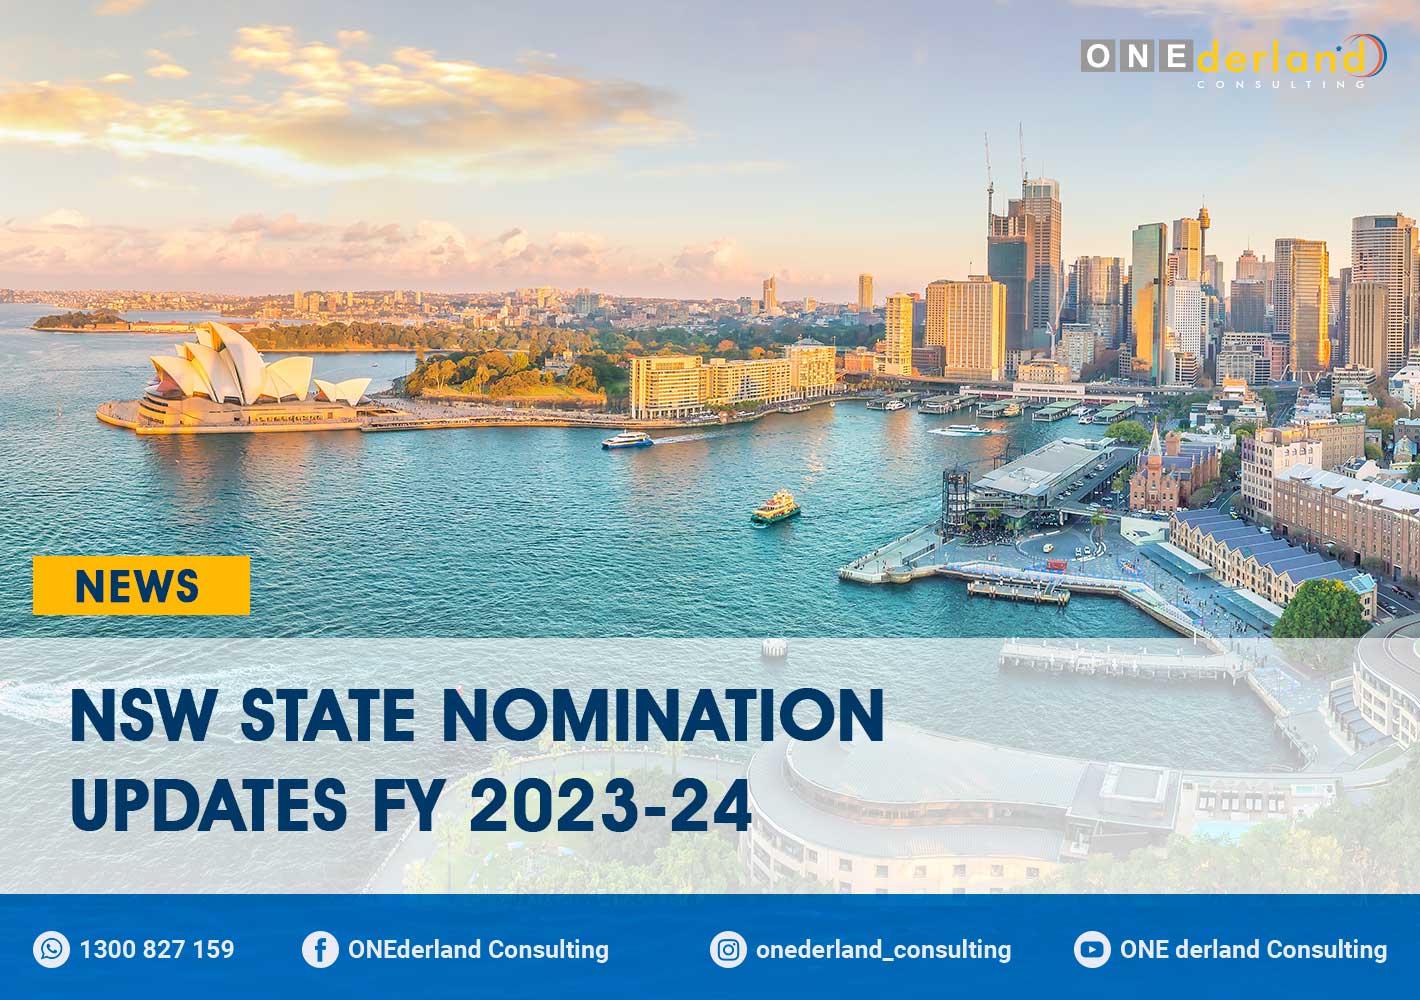 NSW State Nomination Update for 2023-24: New Target Sectors Announced